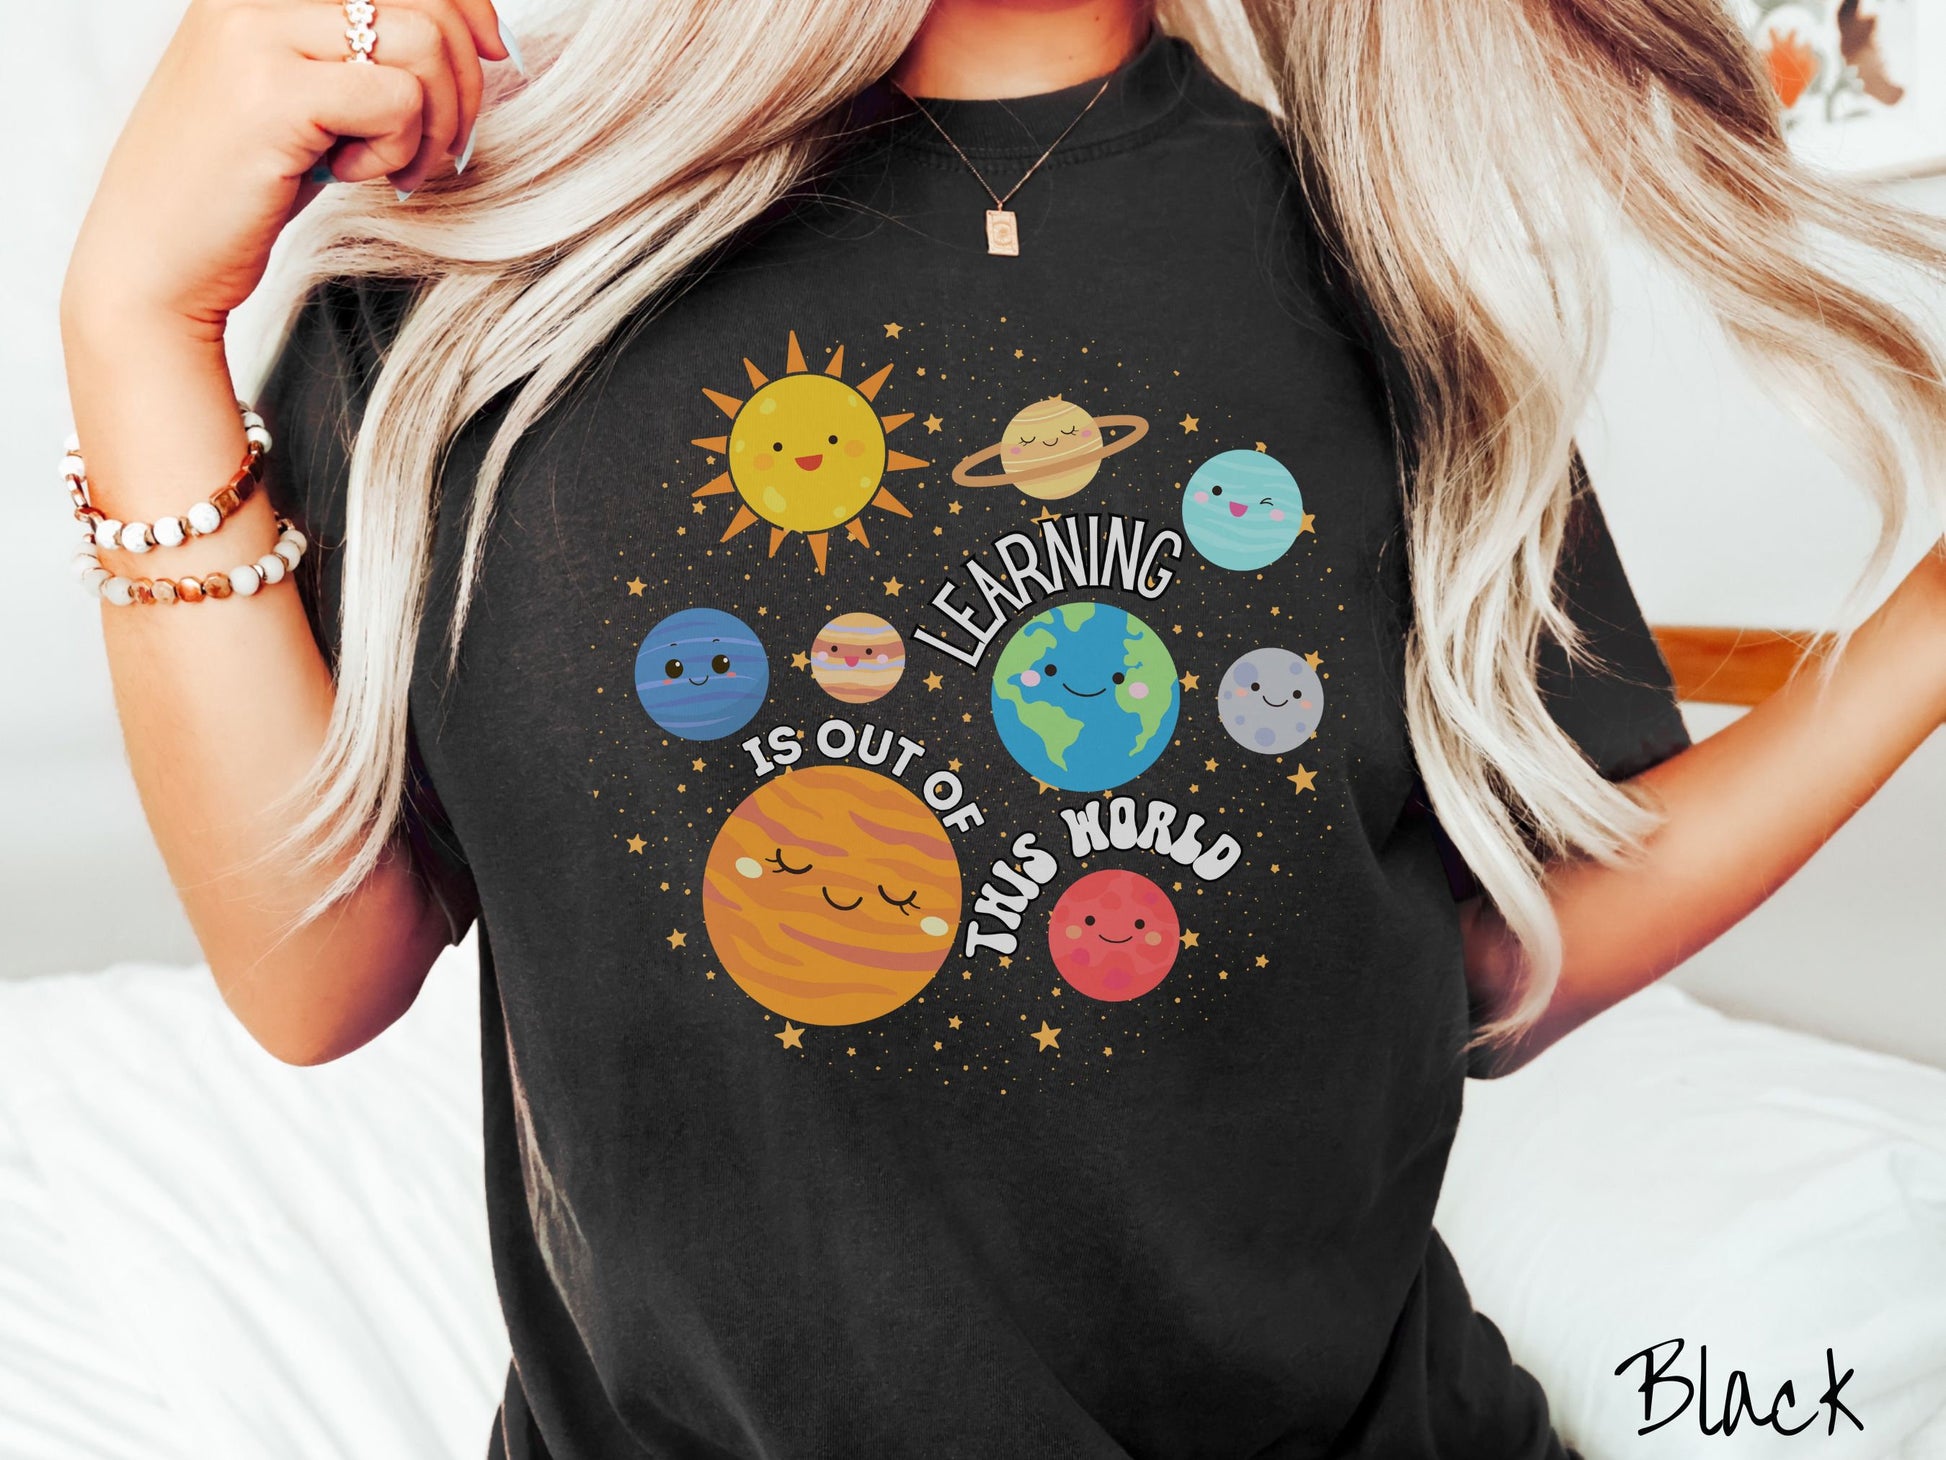 A woman wearing a cute, vintage black colored shirt showing the solar system and all the planets have smiling, happy faces. There is text saying Learning Is Out of This World among the planets, and there are many stars twinkling in the background.